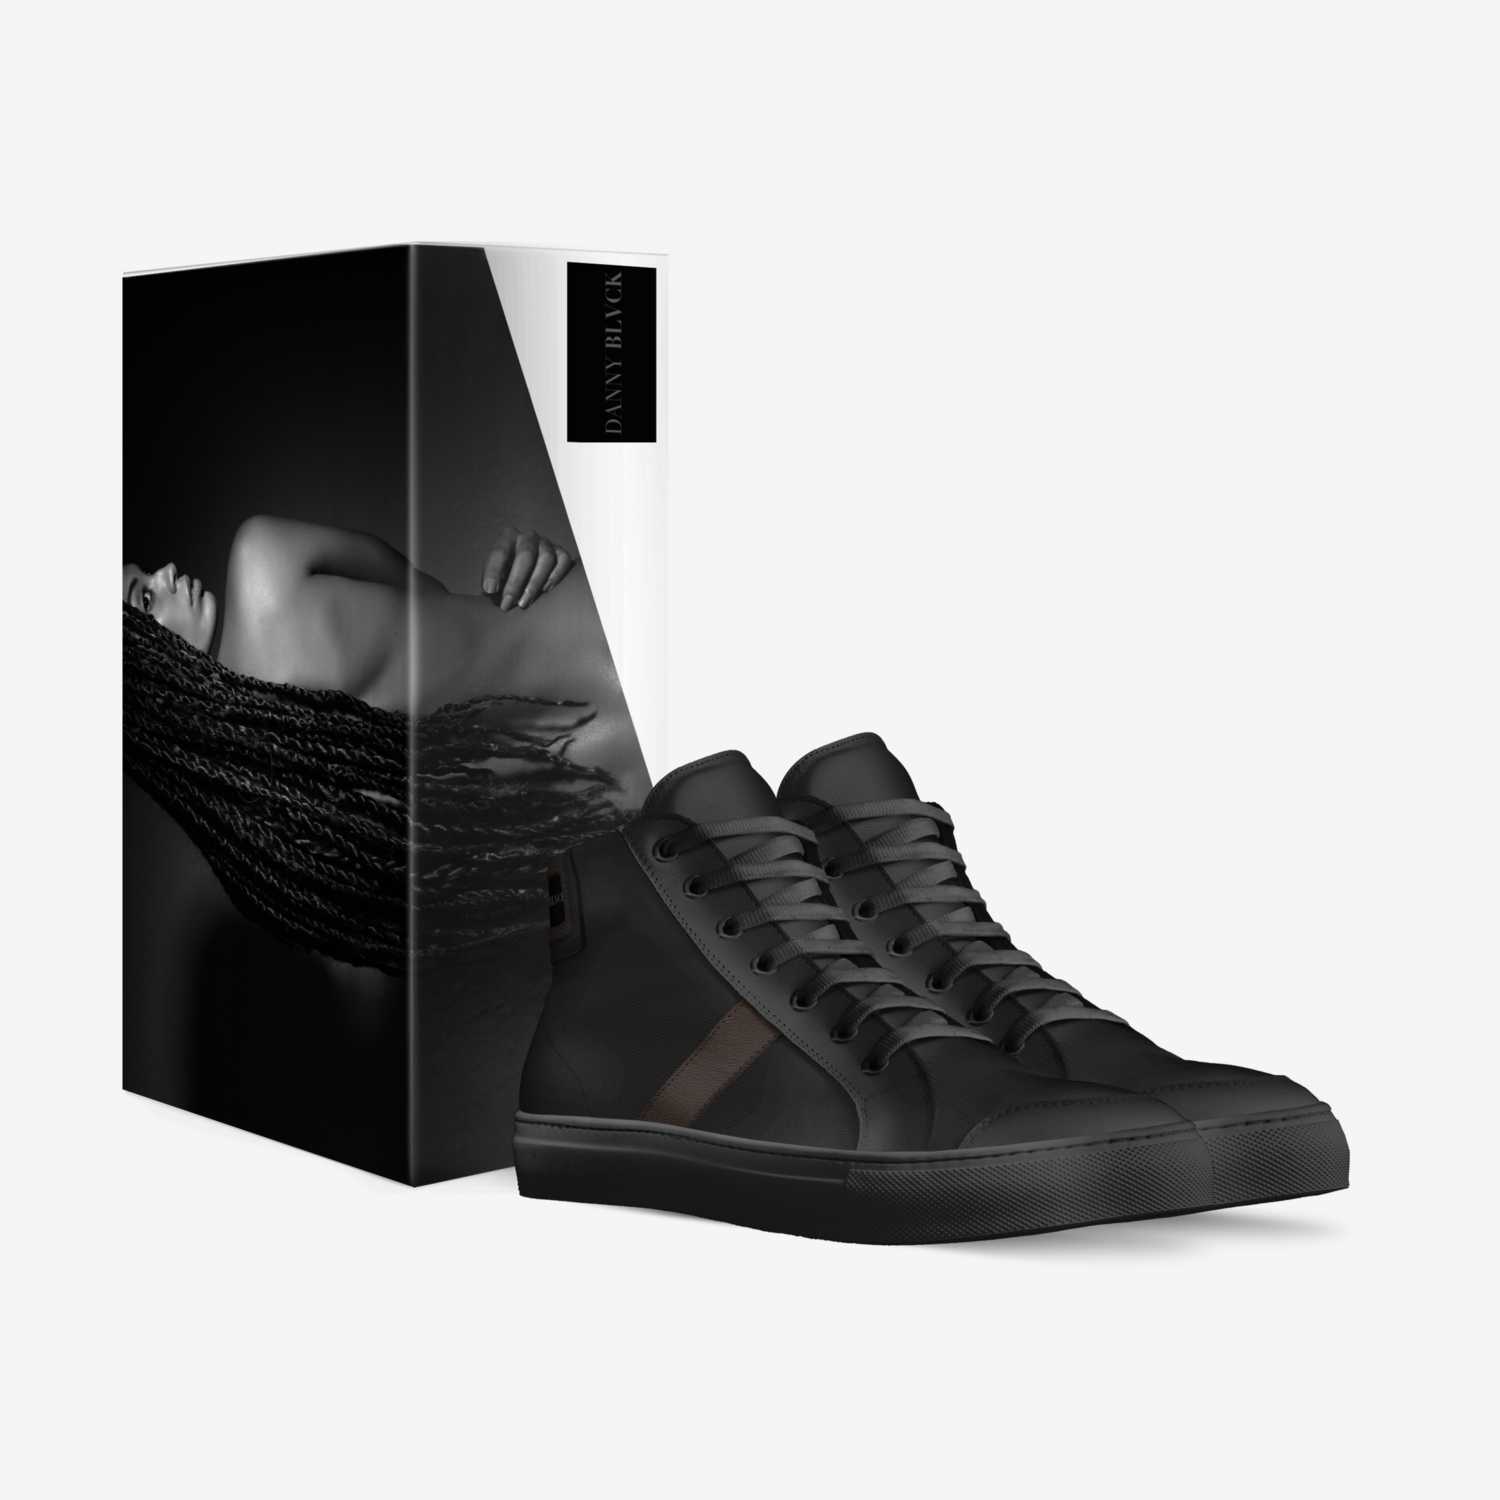 DANNY BLVCK custom made in Italy shoes by Danny Blvck | Box view